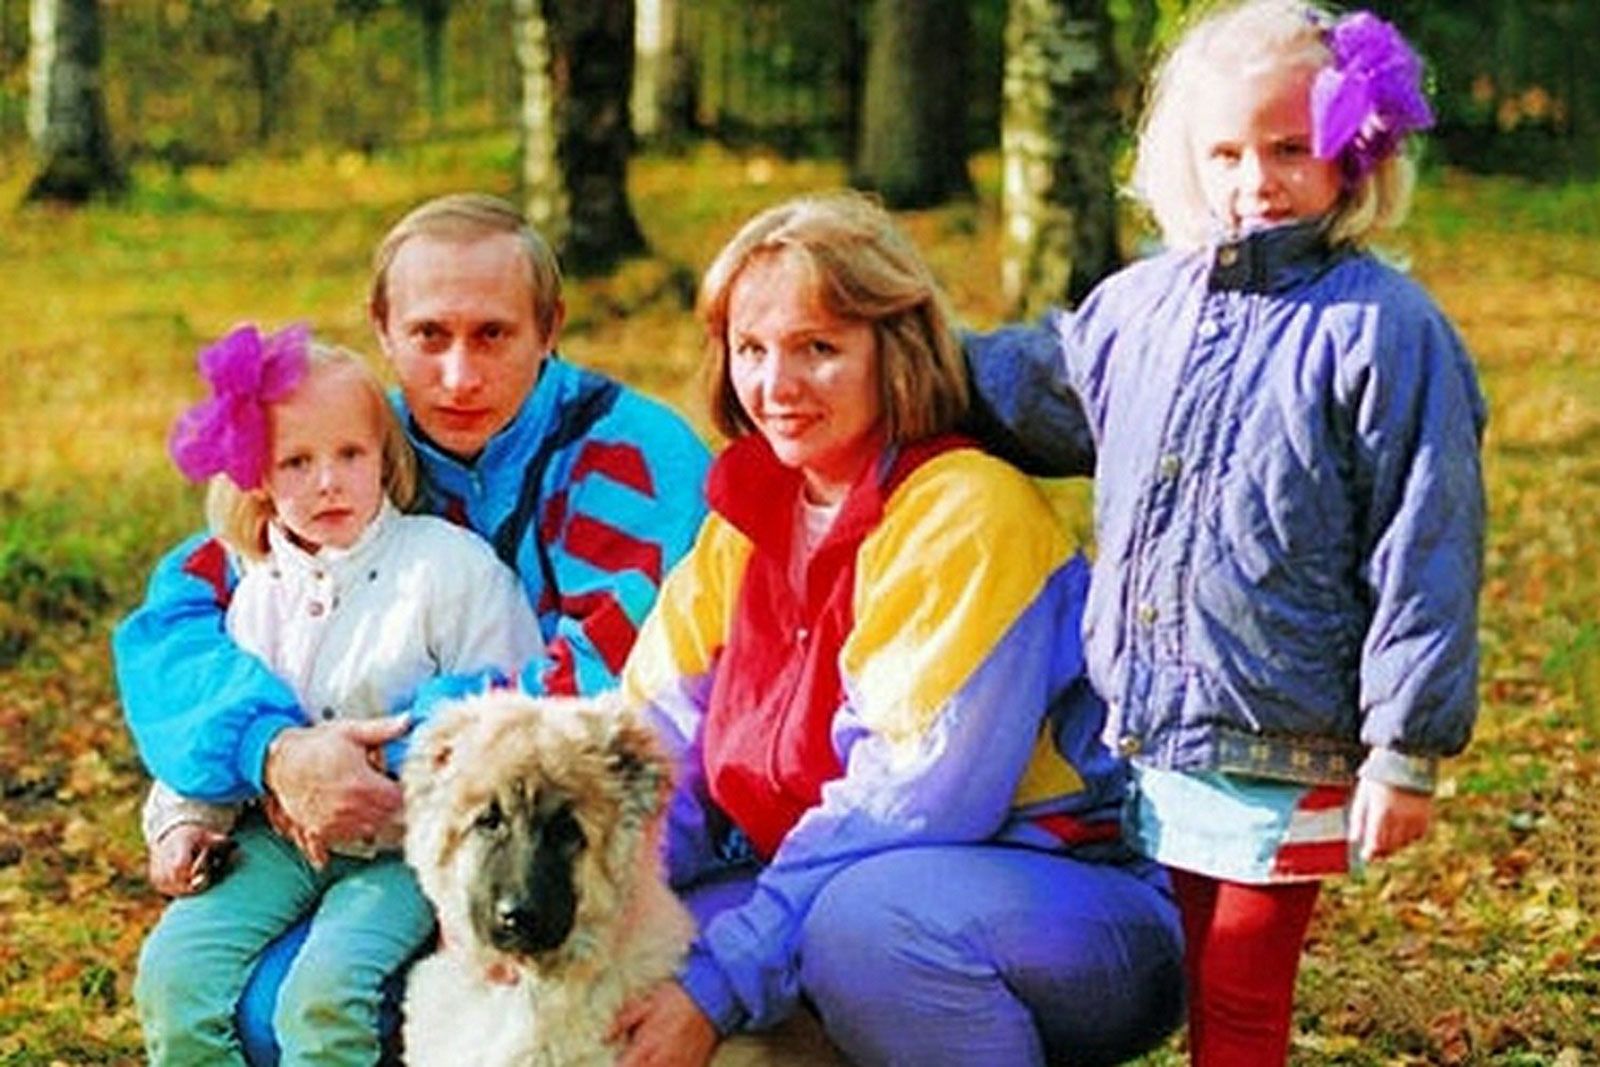 Putin poses for a picture with his wife, Lyudmila, and daughters, Yekaterina and Maria. The couple married in 1983 and divorced in 2014.